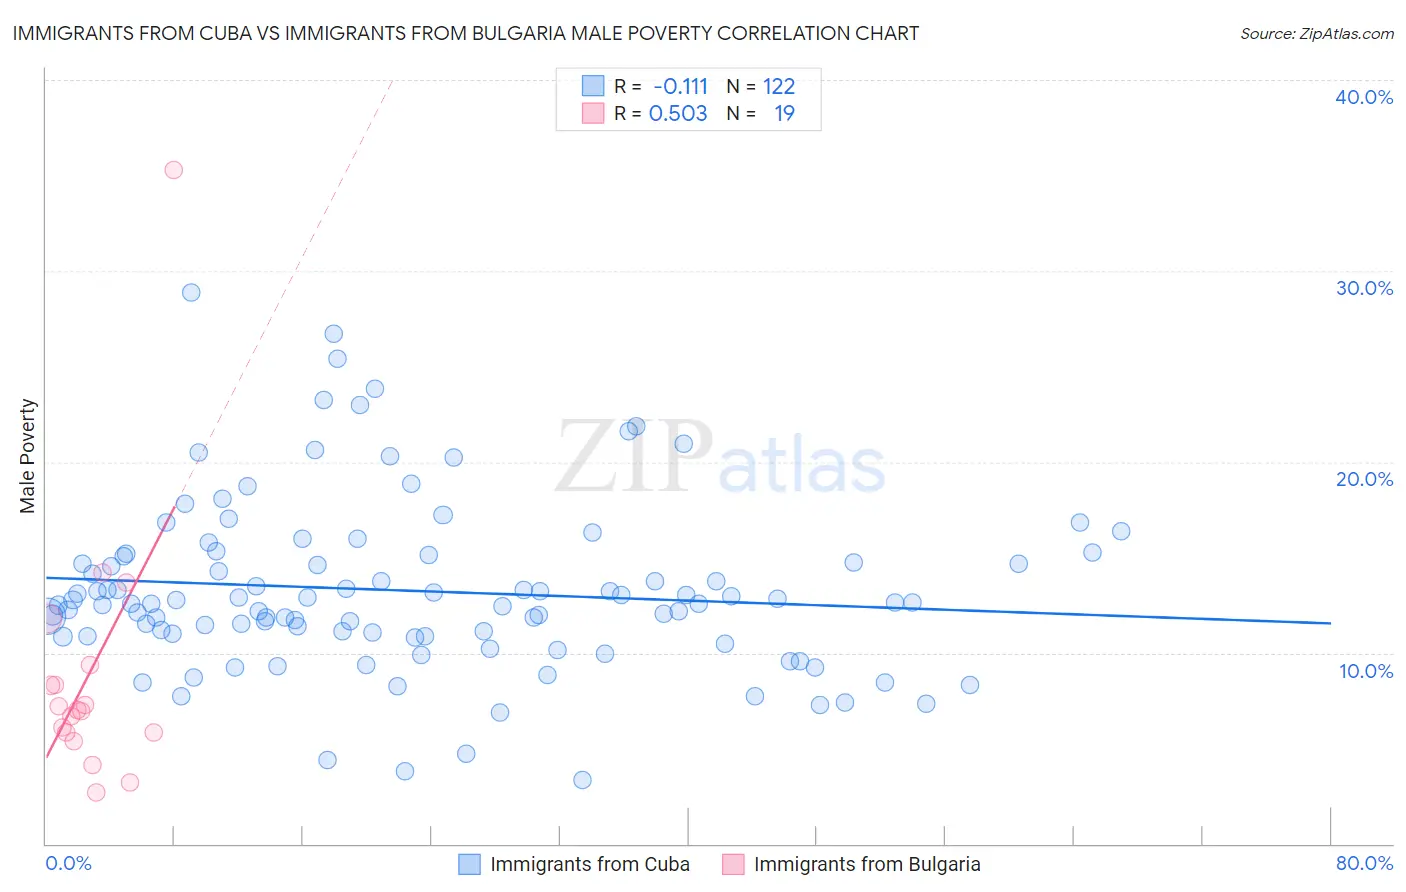 Immigrants from Cuba vs Immigrants from Bulgaria Male Poverty